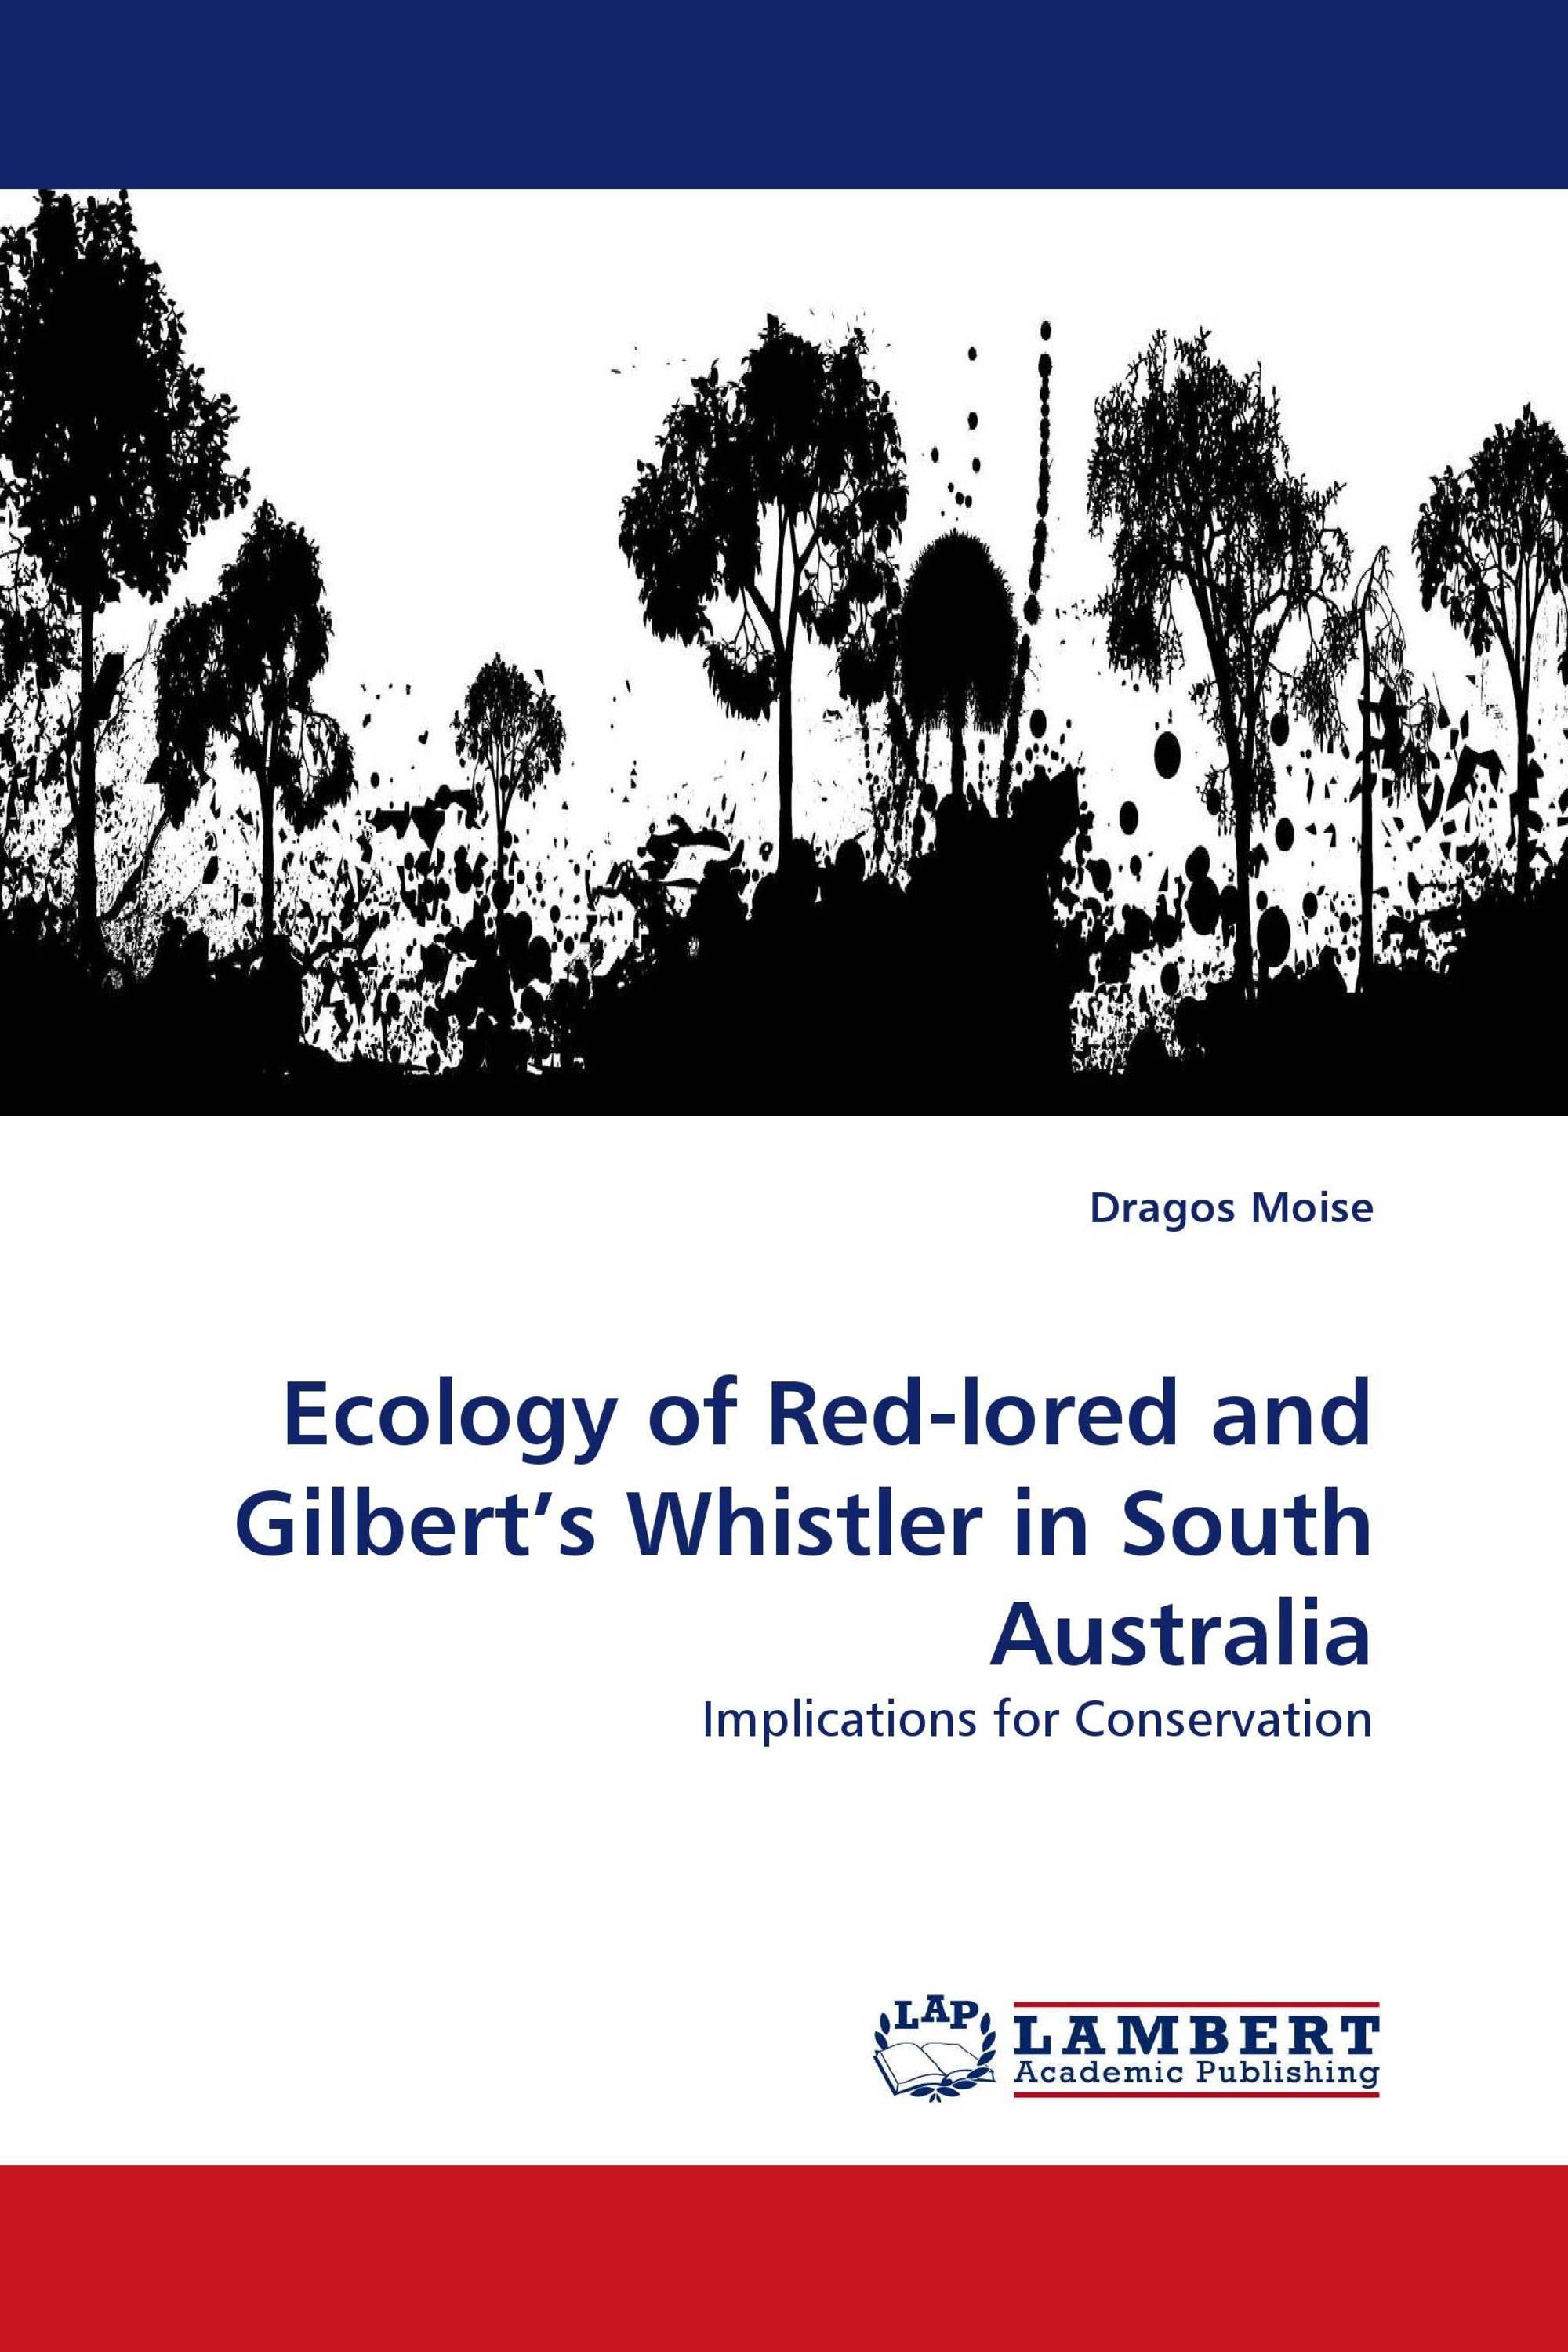 Ecology of Red-lored and Gilbert’s Whistler in South Australia